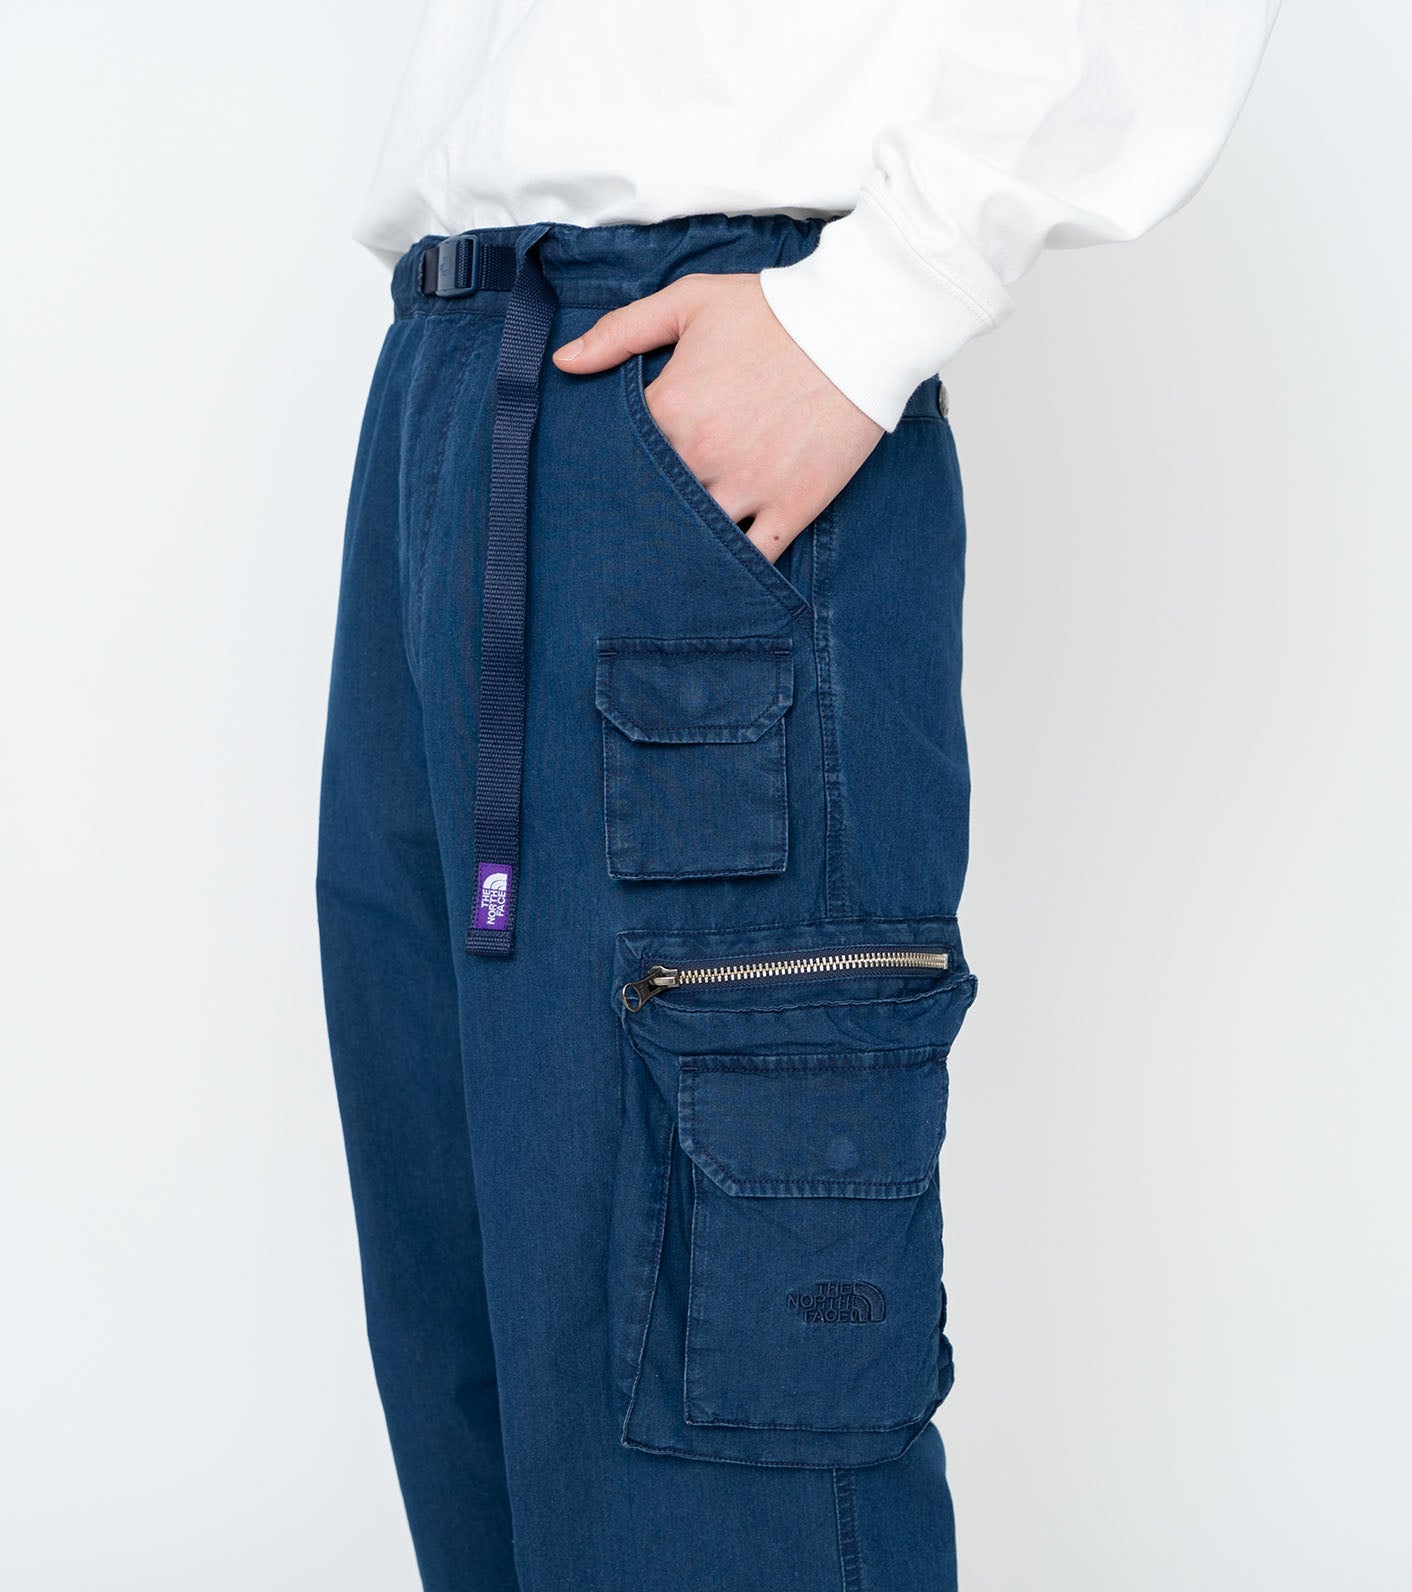 THE NORTH FACE PURPLE LABEL Indigo Field Pants – unexpected store